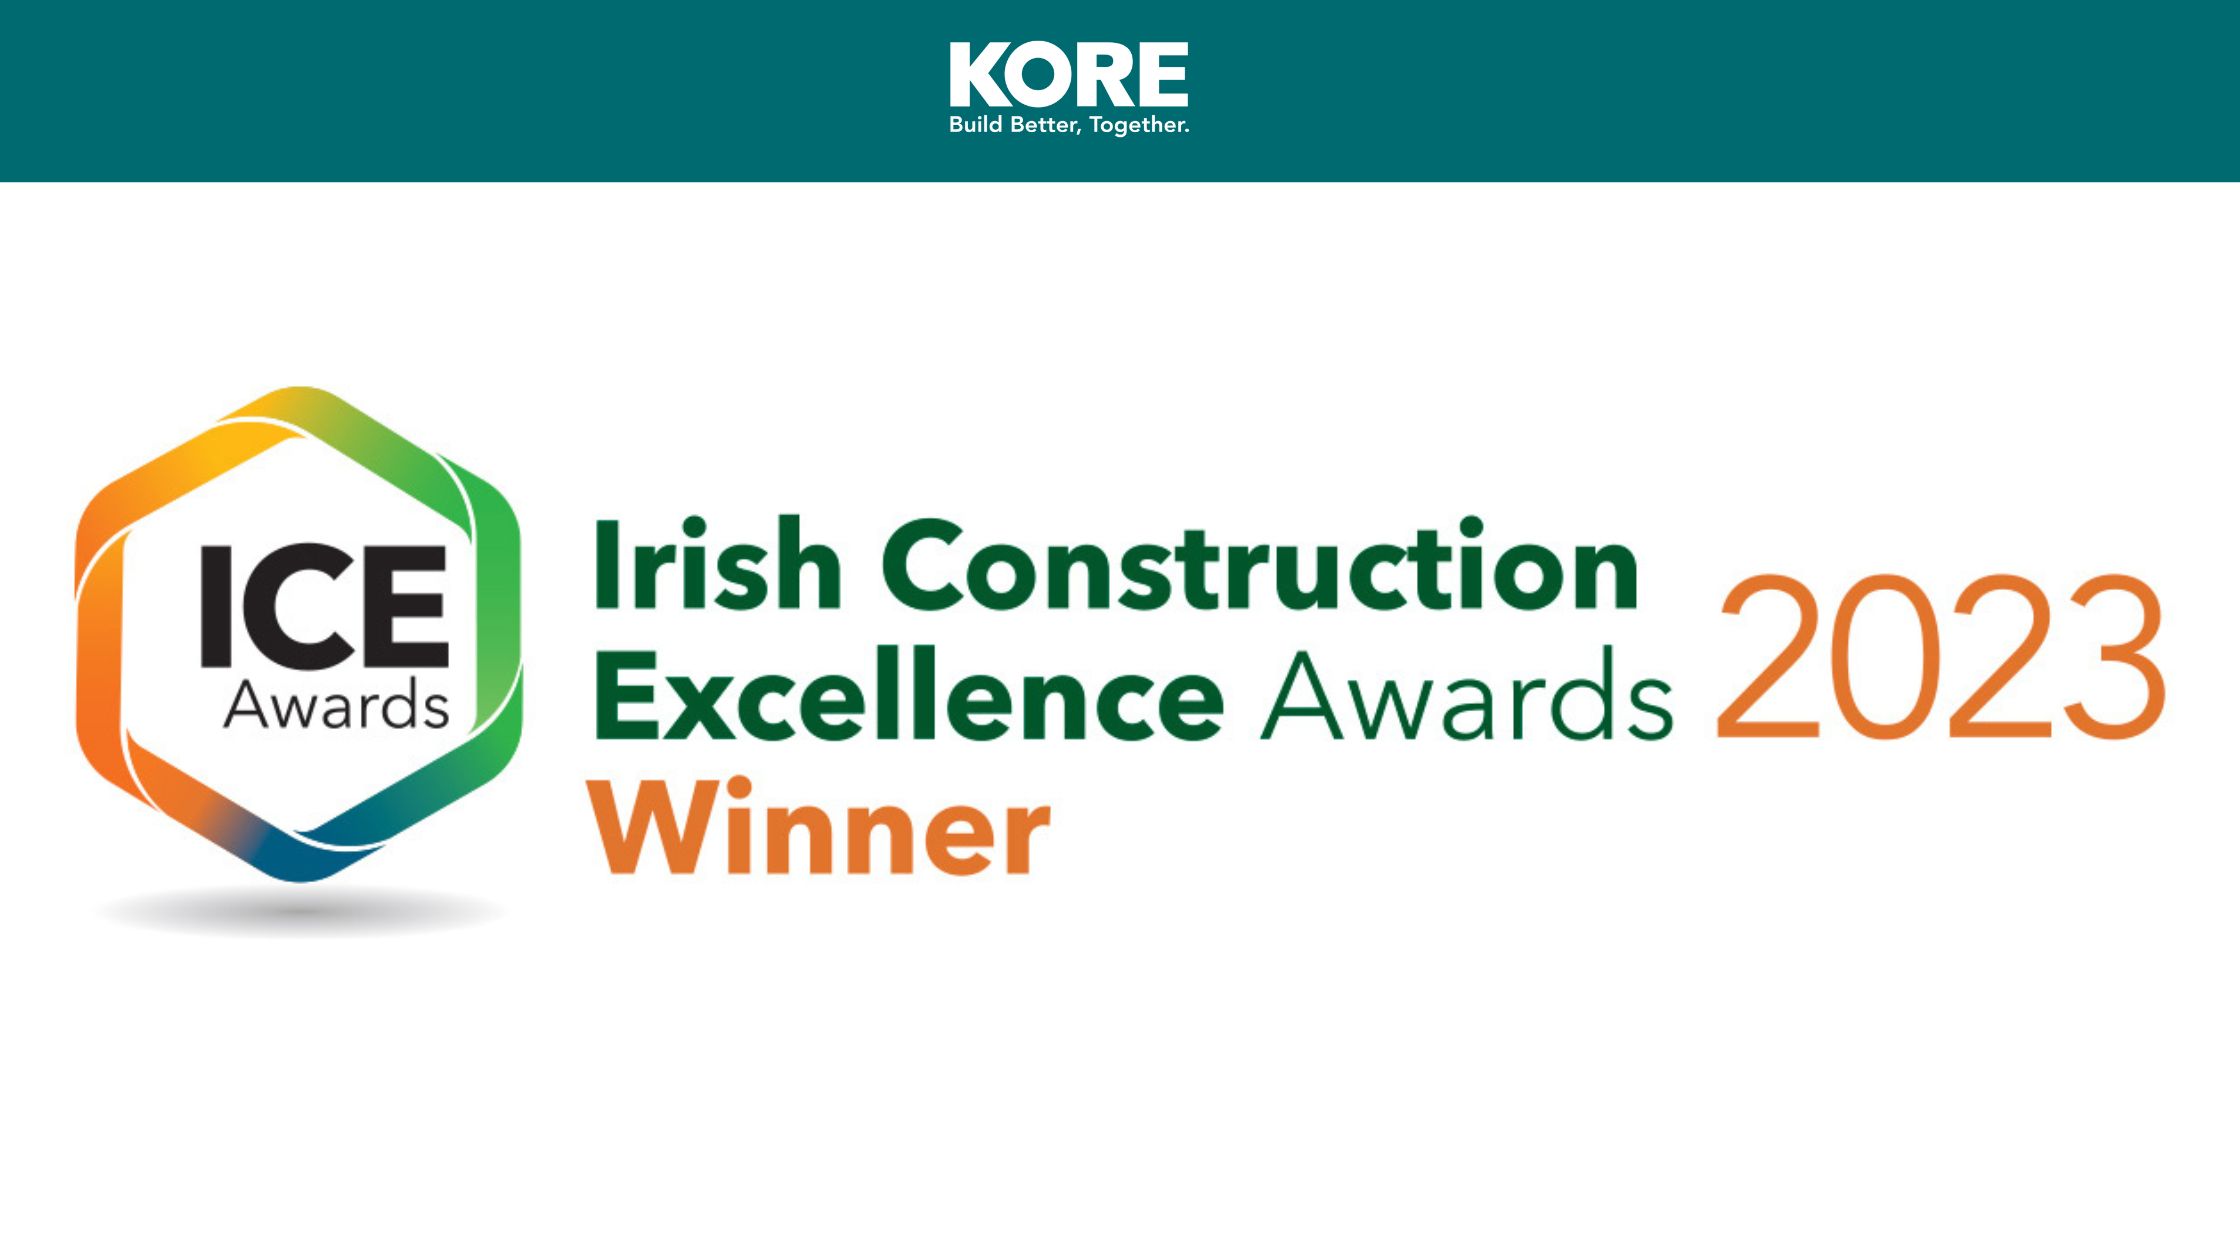 Irish Construction Excellence Awards Logo for 2023 Winners